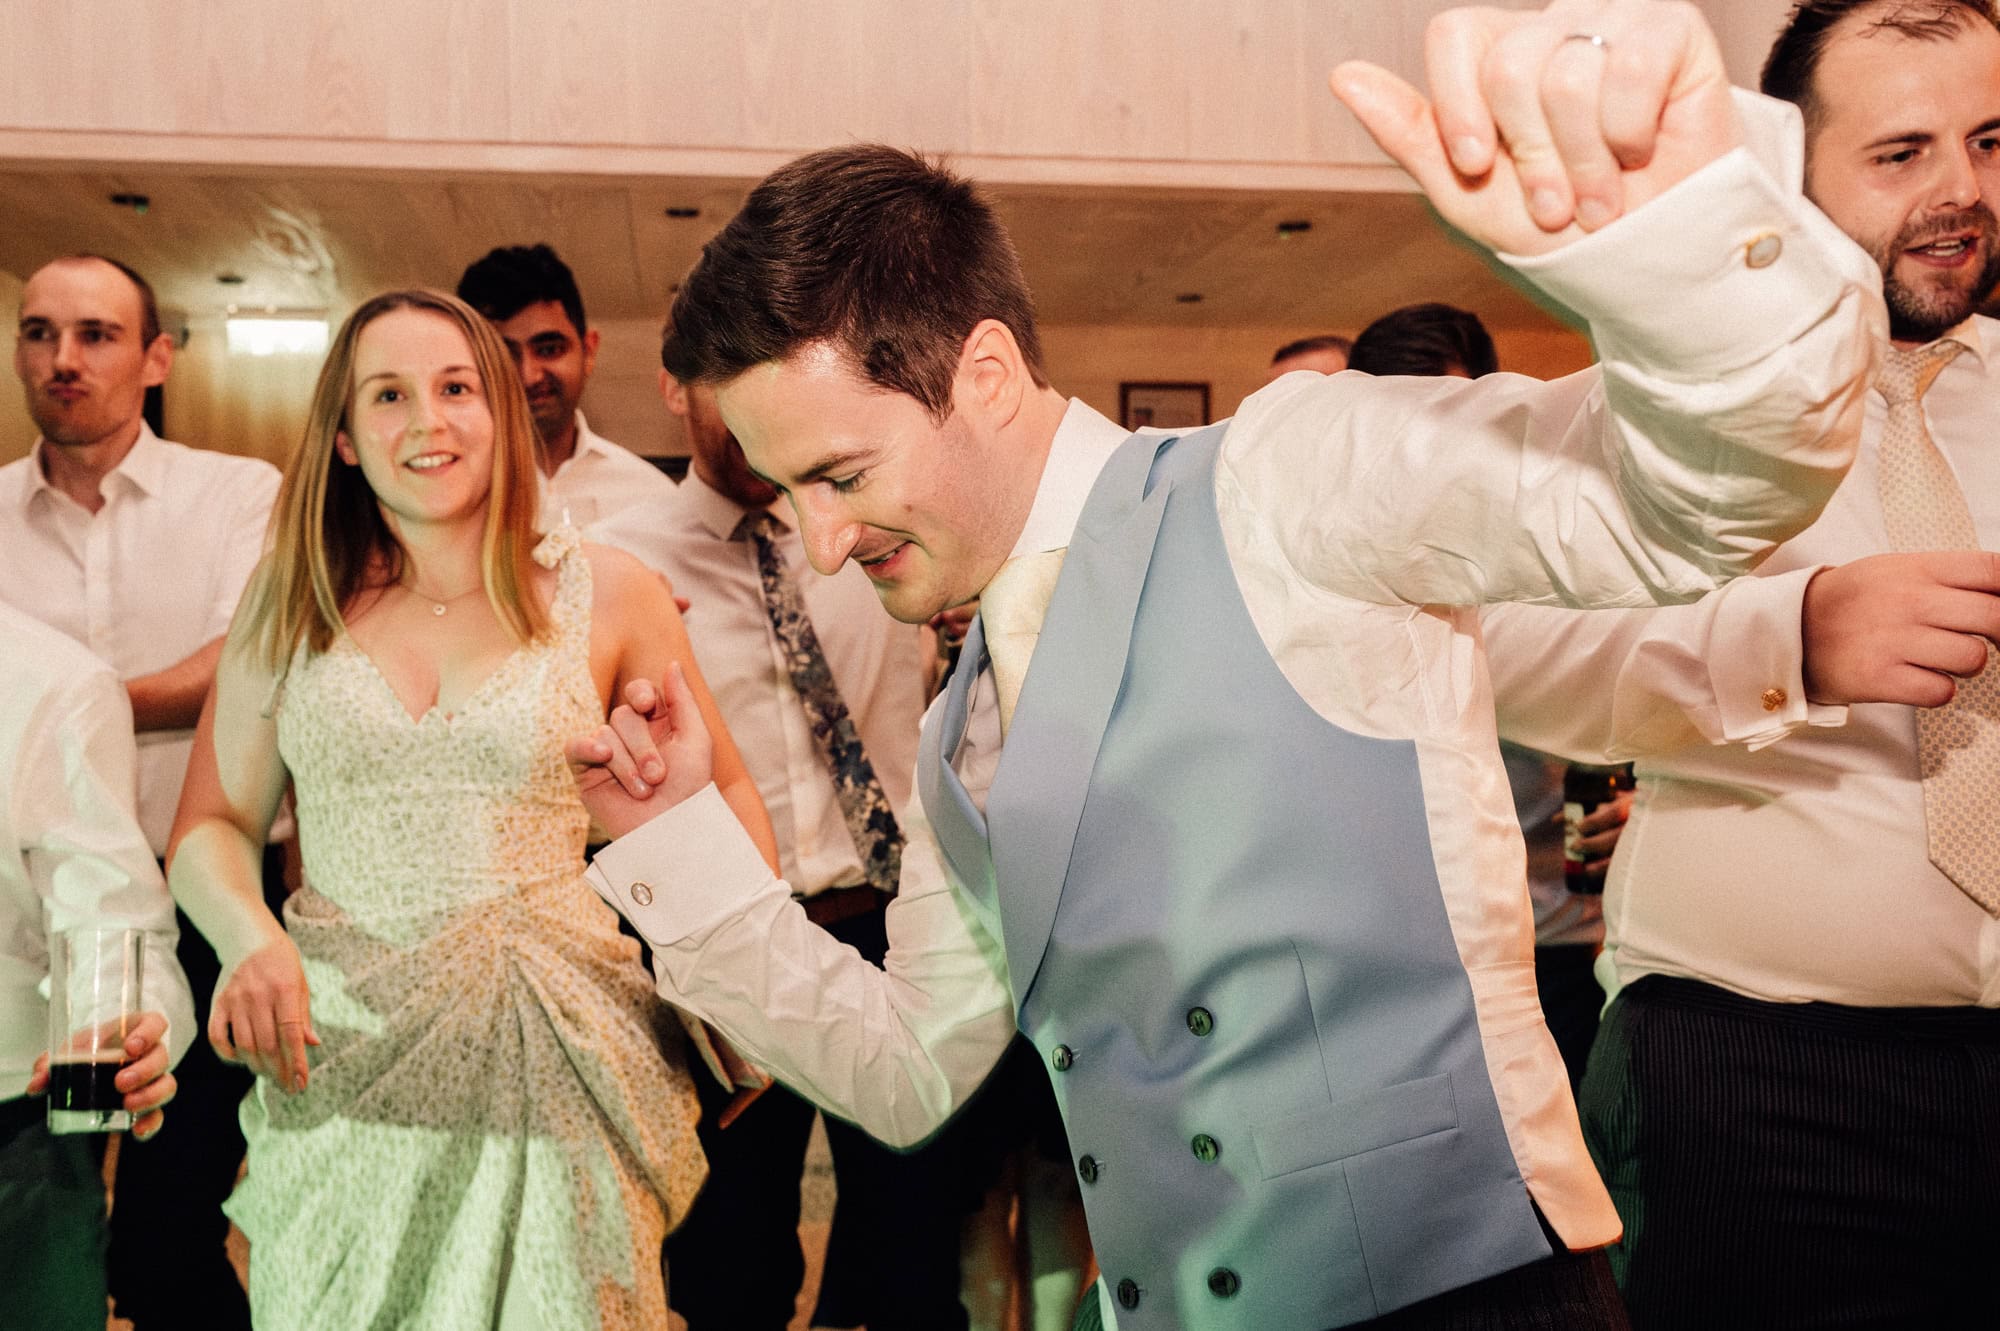 The groom hits the dance floor at his wedding at Emmanuel College in Cambridge